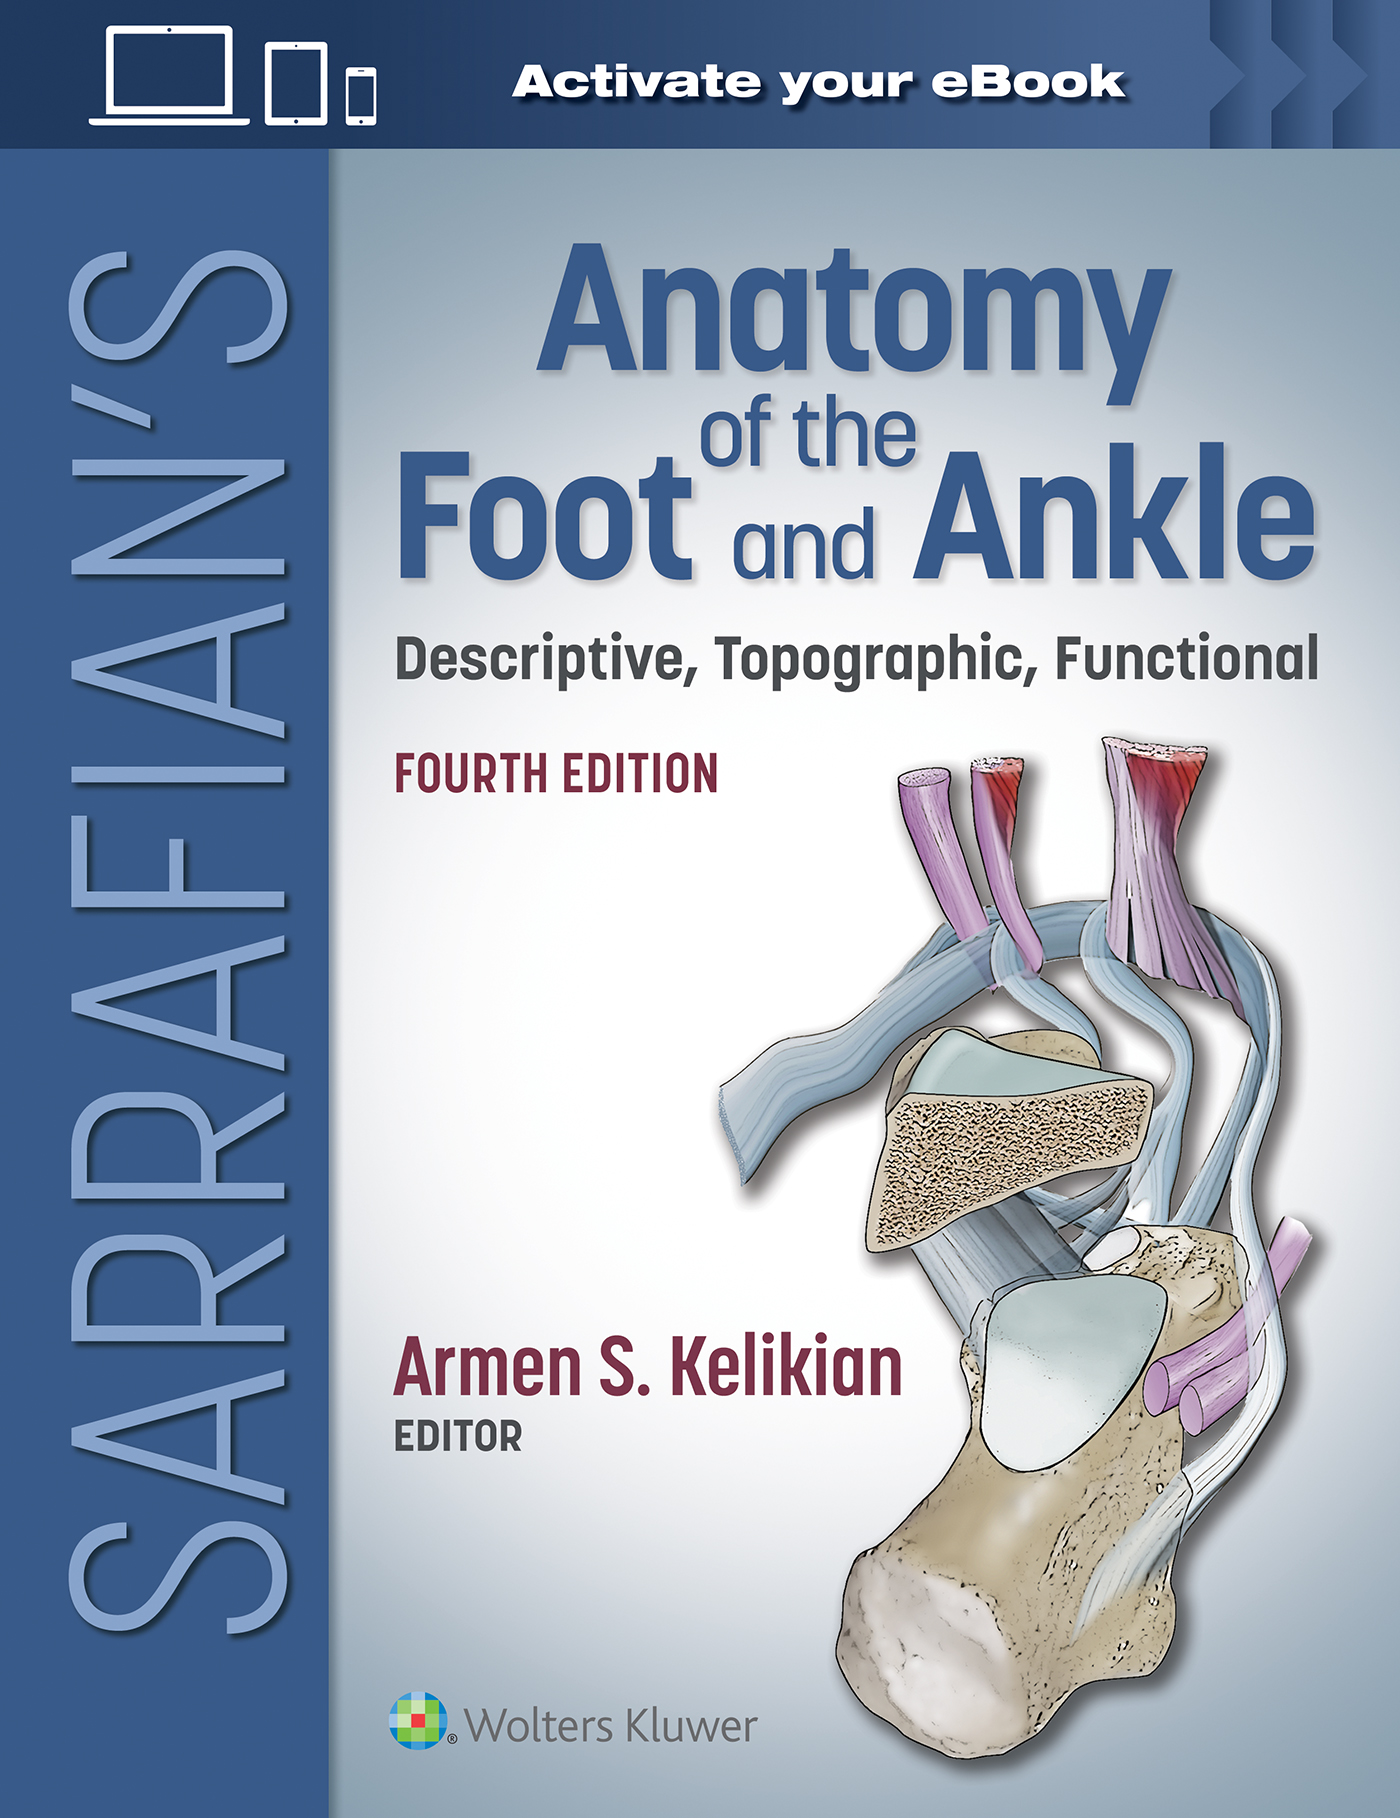 Sarrafian's Anatomy of the Foot & Ankle, 4th ed.- Descriptive, Topographic, Functional